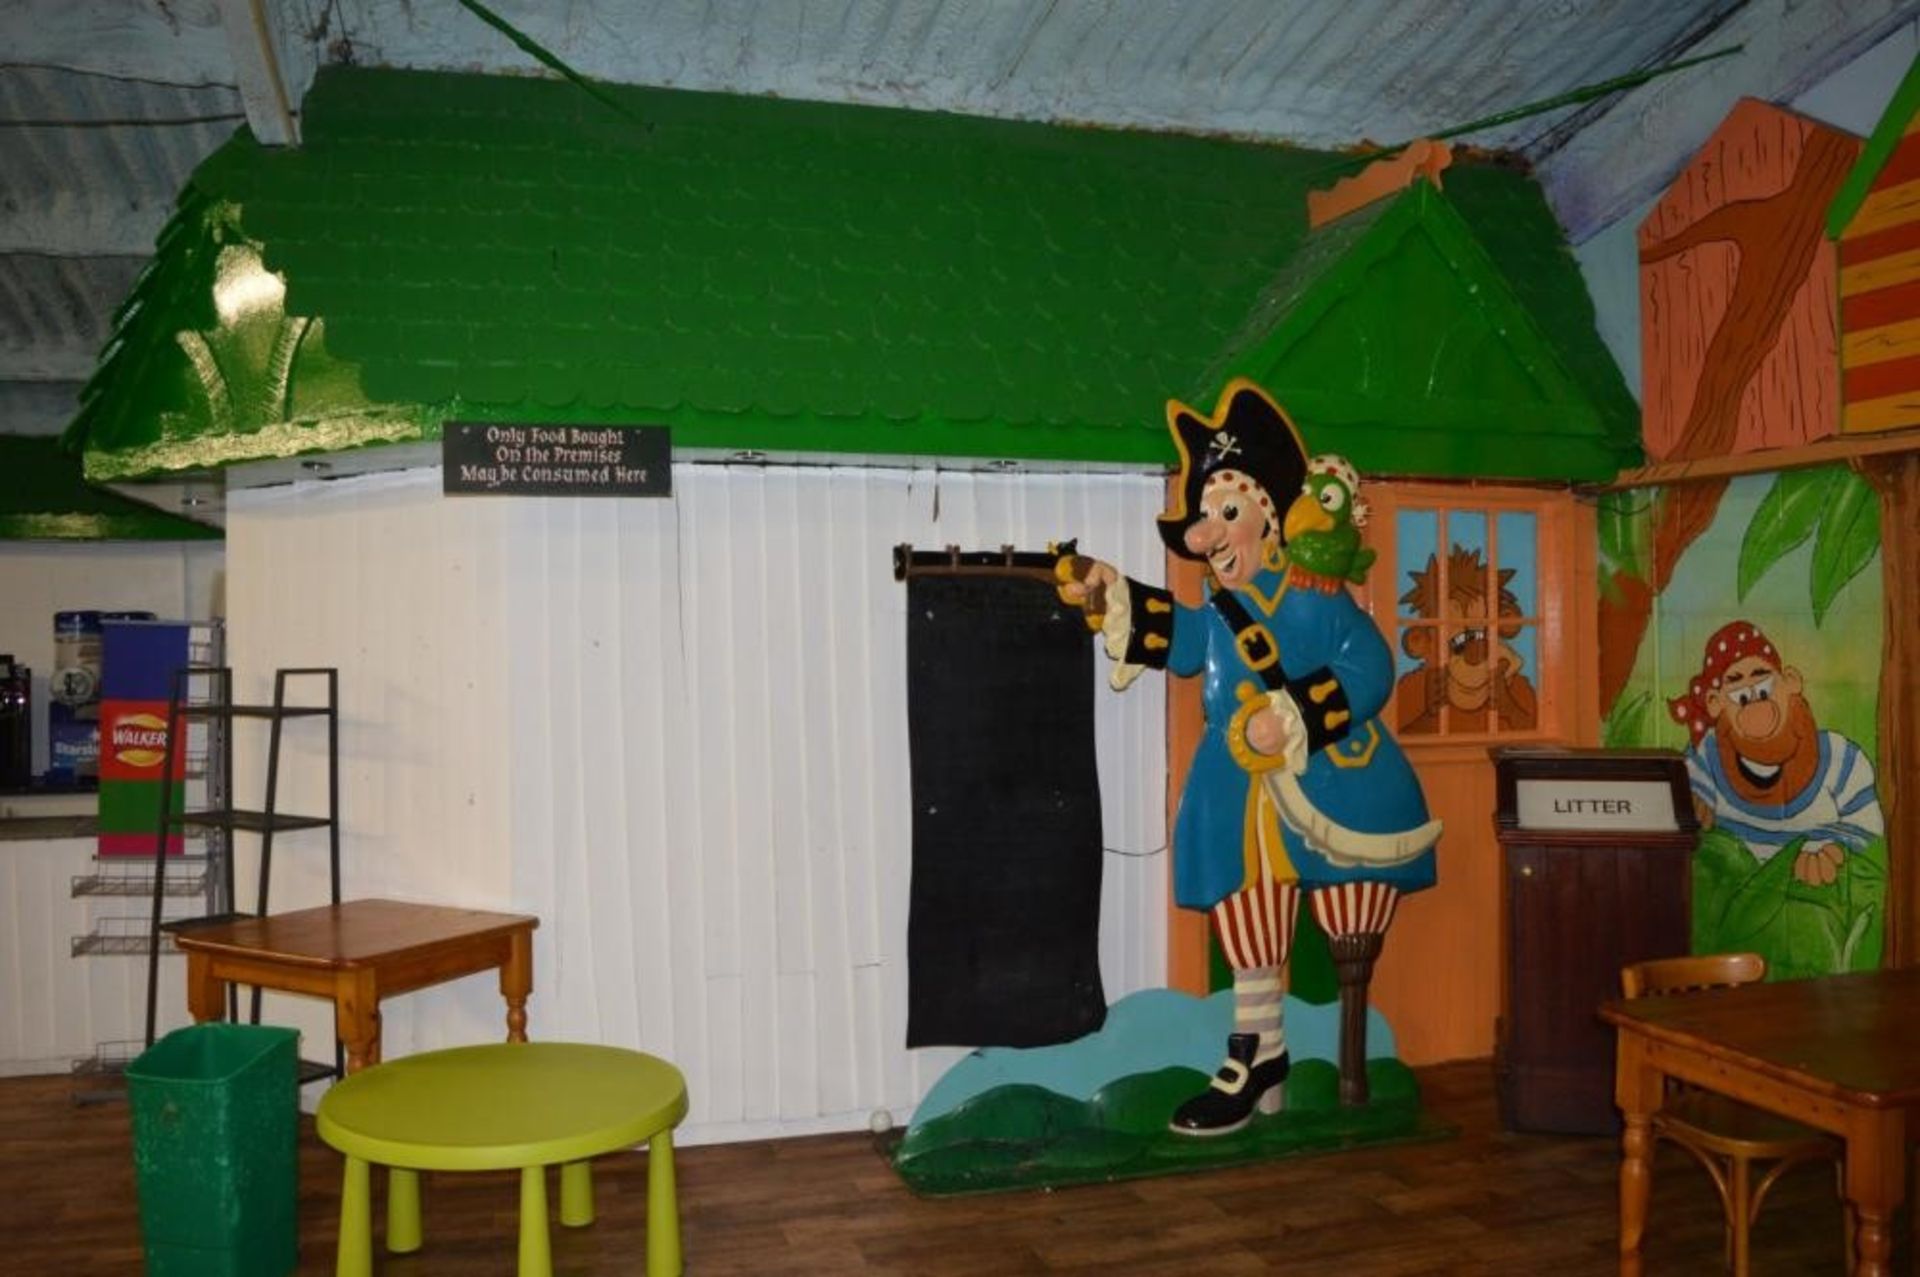 1 x Puddletown Pirates Bespoke Restaurant Kitchen Enclosure Hut With Serving Counter - Hut Dimension - Image 3 of 16